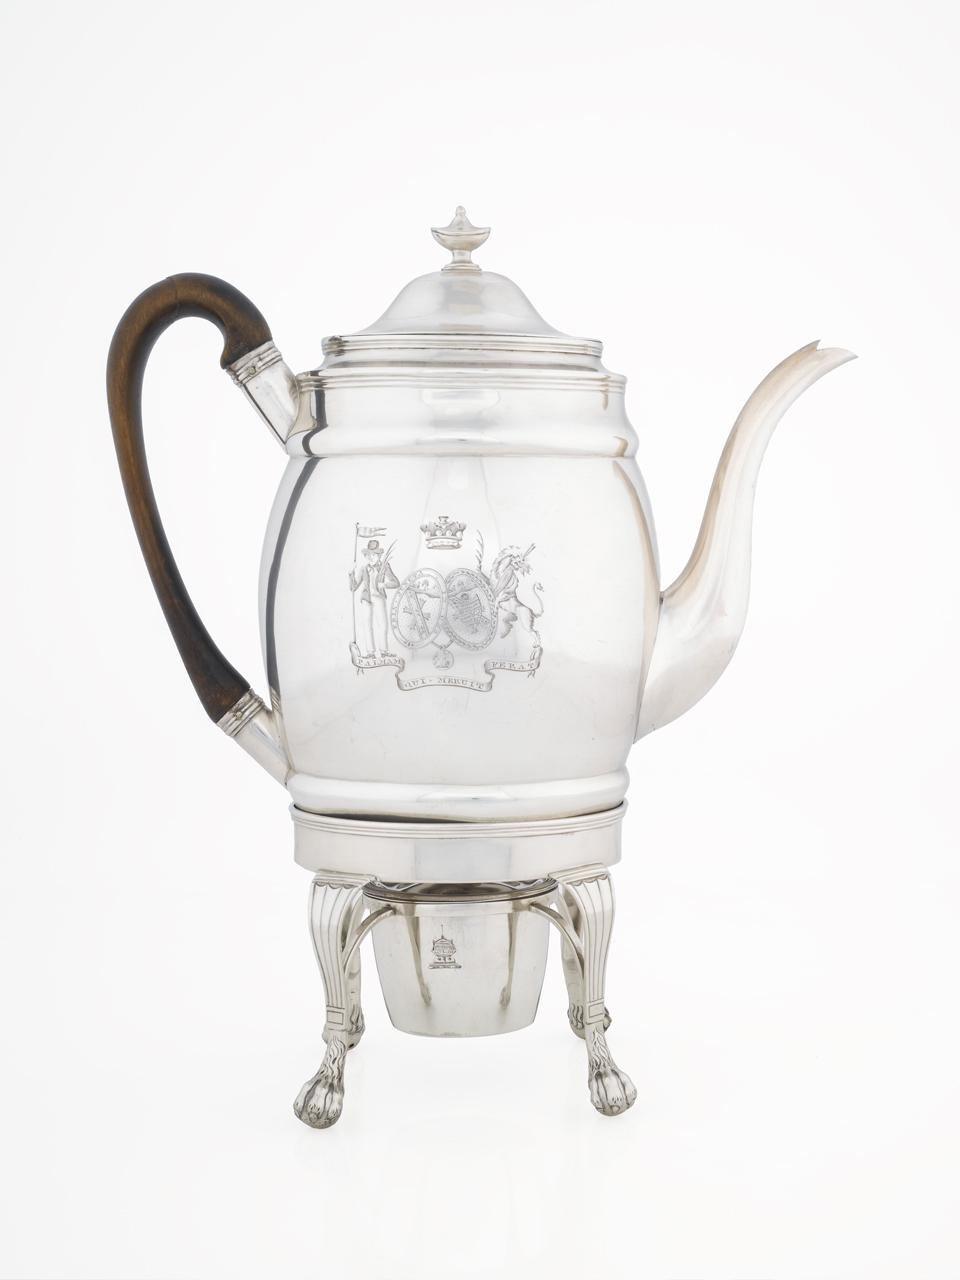 Coffee pot owned by Admiral Lord Nelson (PLT0120, National Maritime Museum)